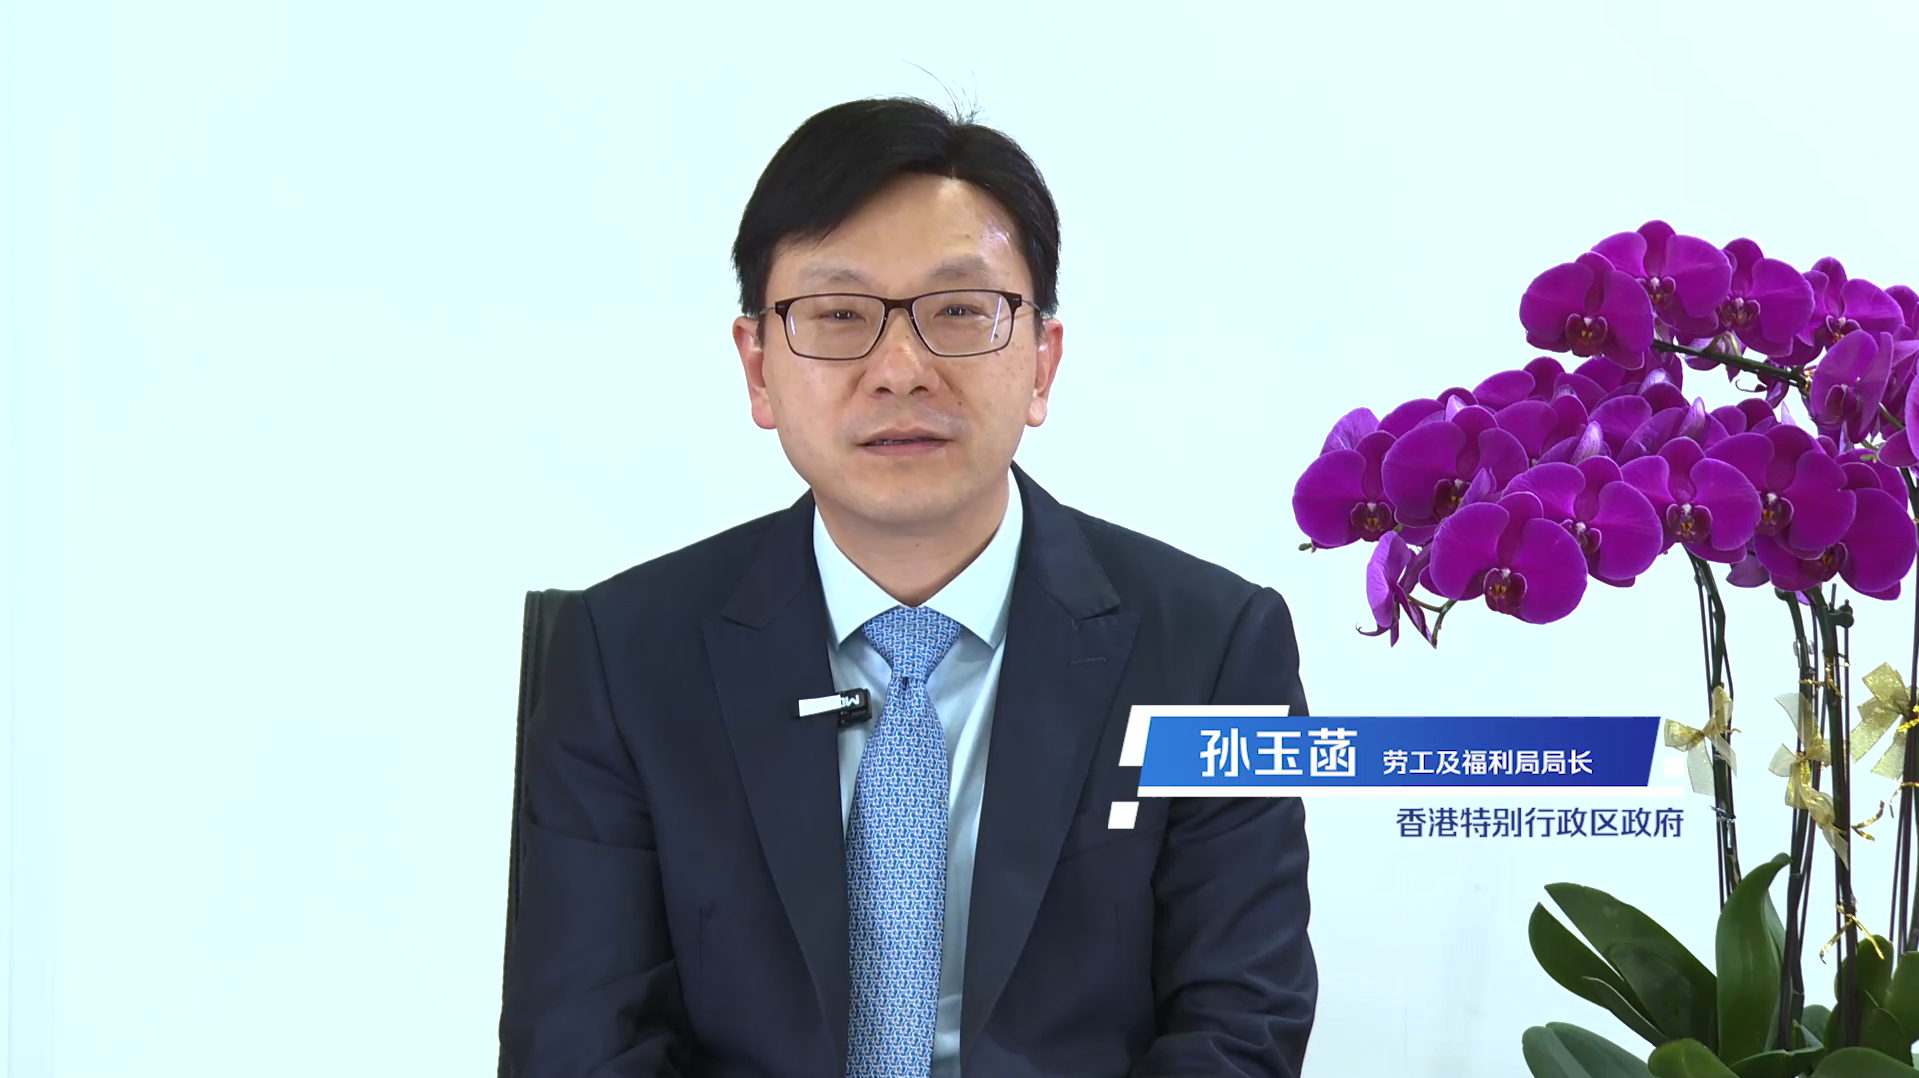 The Secretary for Labour and Welfare, Mr Chris Sun, today (June 12) attended the "Living the Dream in Hong Kong" online job fair co-hosted by Hong Kong Talent Engage and recruitment platforms in Hong Kong and the Mainland. Photo shows a screenshot of Mr Sun delivering his opening remarks at the online job fair.